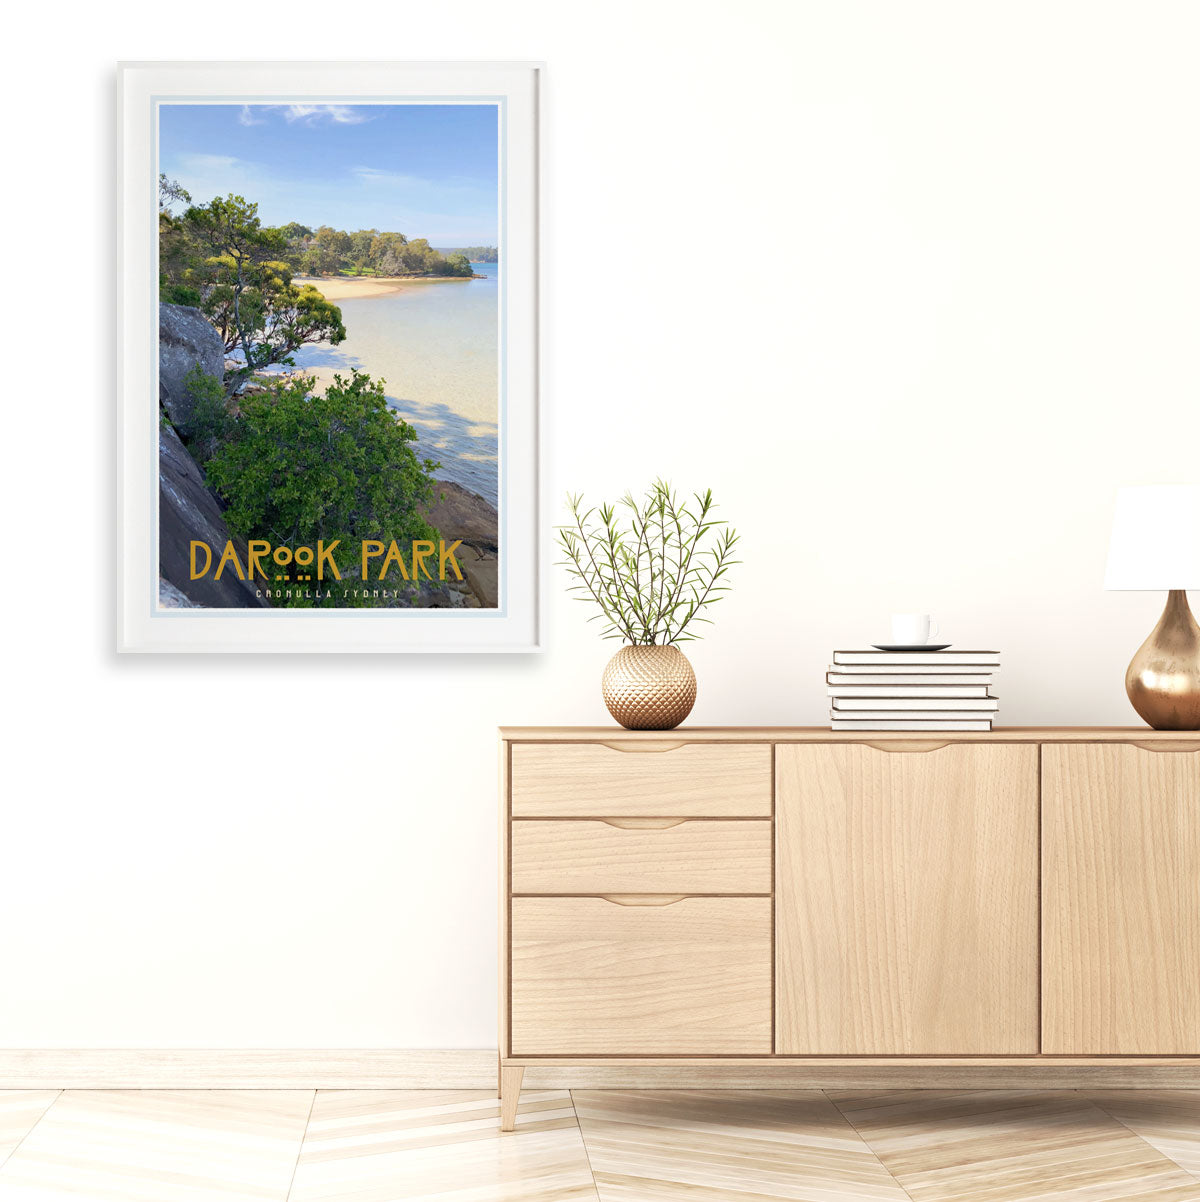 Cronulla Darook Park framed print travel style by places we luv